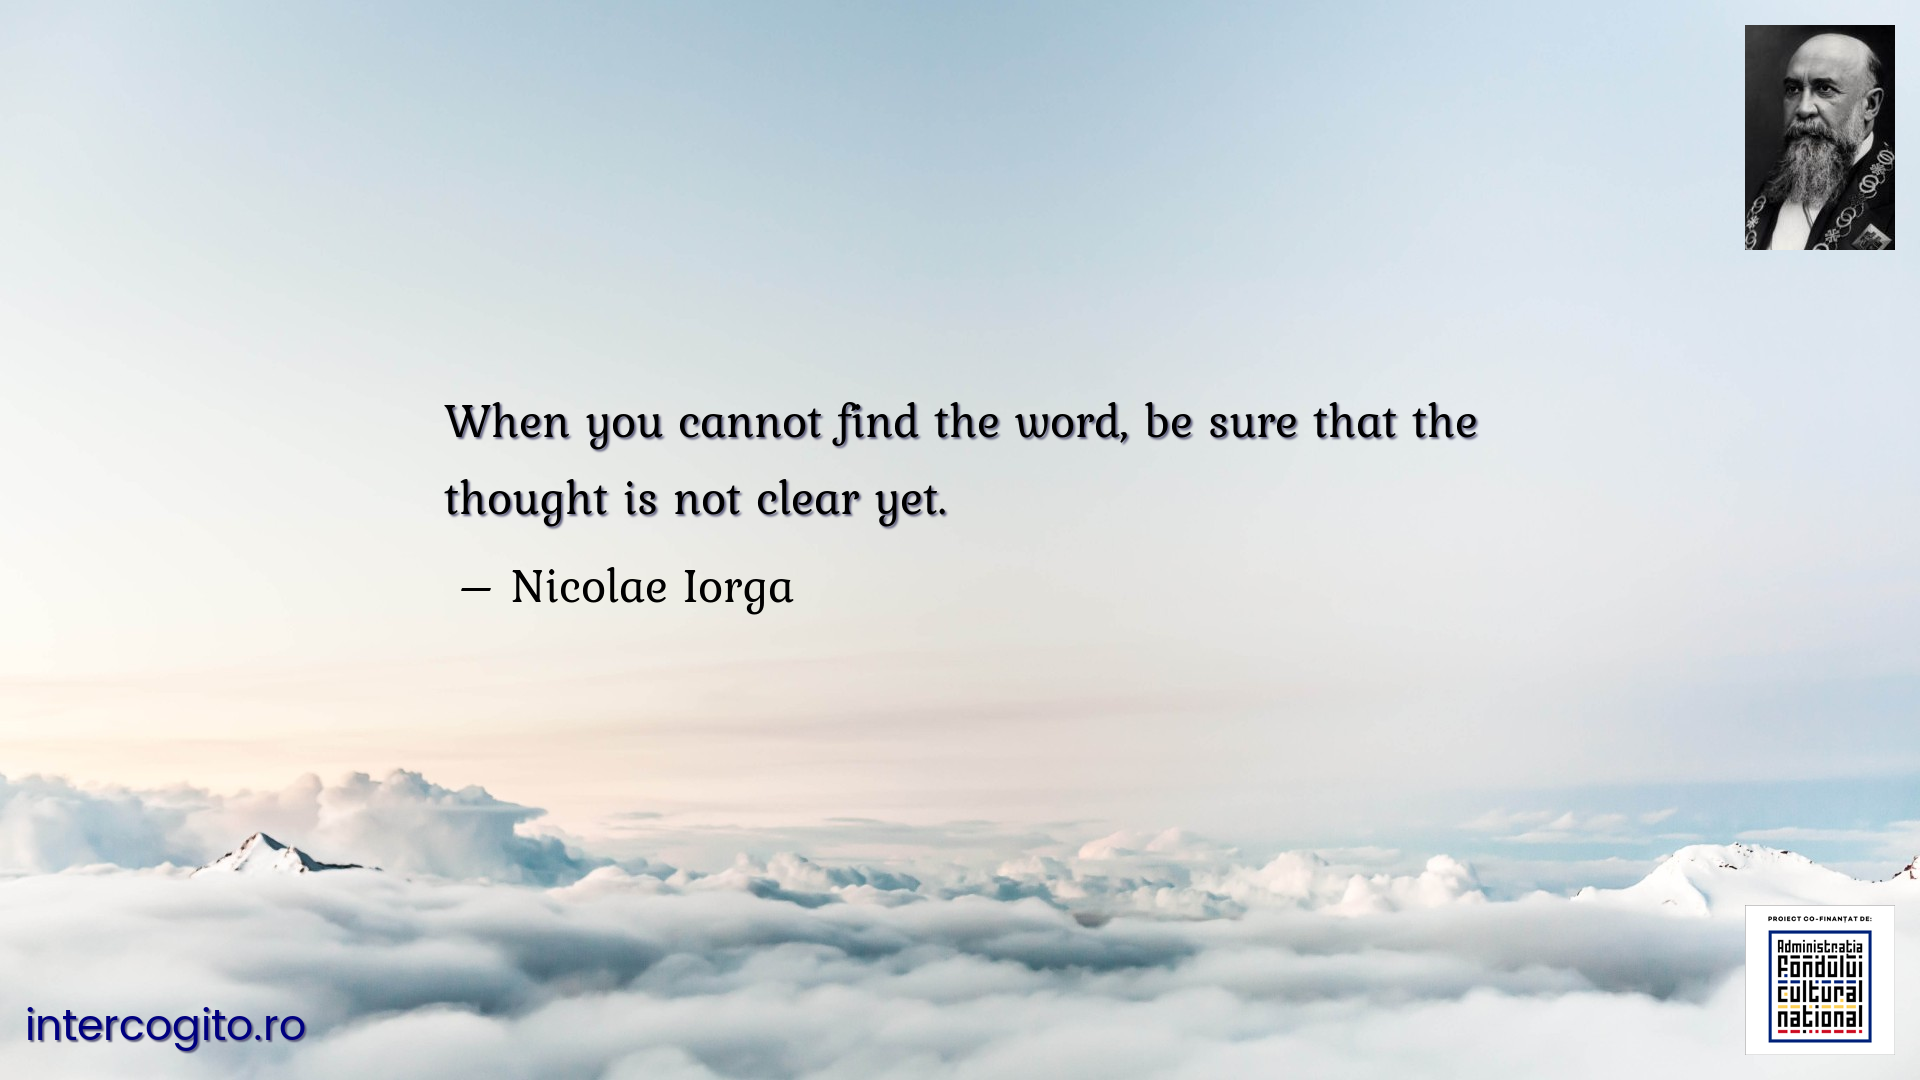 When you cannot find the word, be sure that the thought is not clear yet.